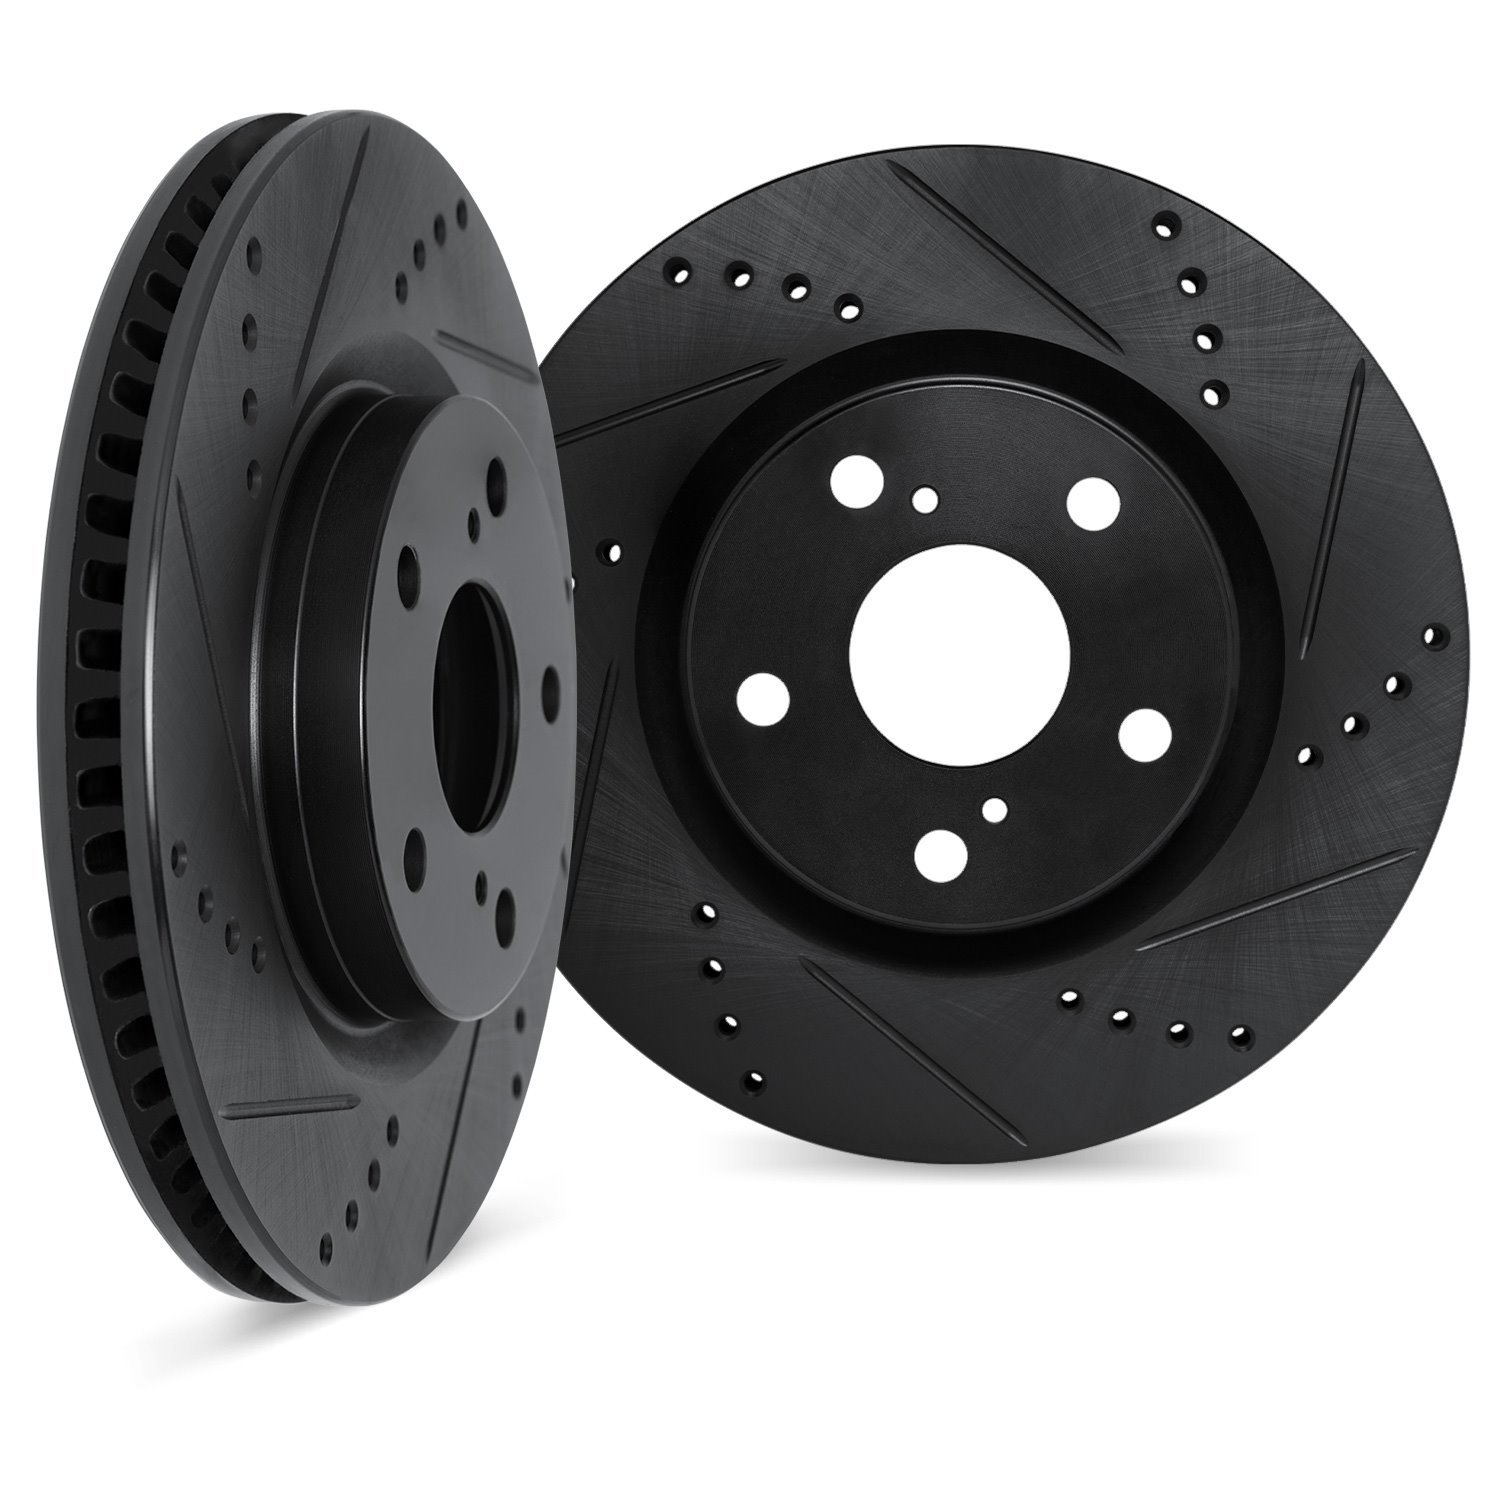 8002-76139 Drilled/Slotted Brake Rotors [Black], Fits Select Lexus/Toyota/Scion, Position: Rear